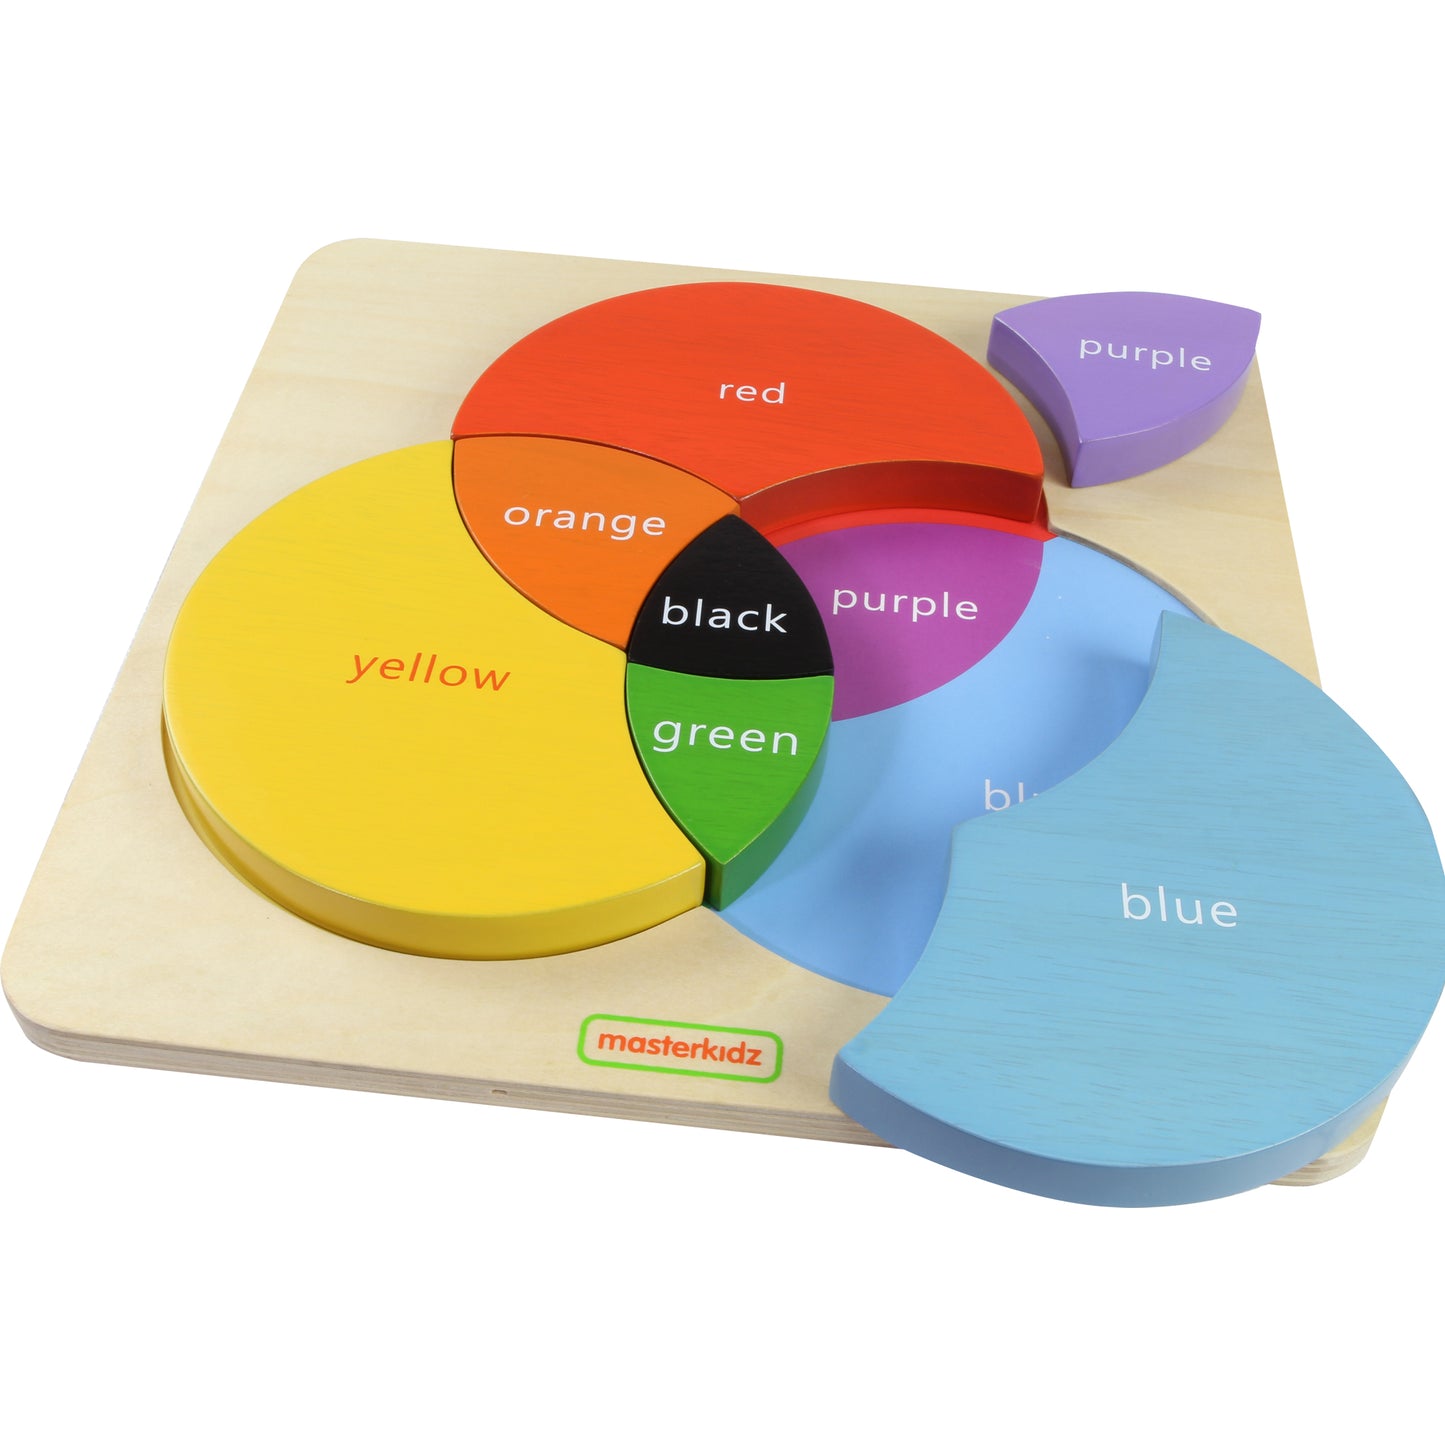 Masterkidz Color Mixing Learning Board 三元色彩混色學習板